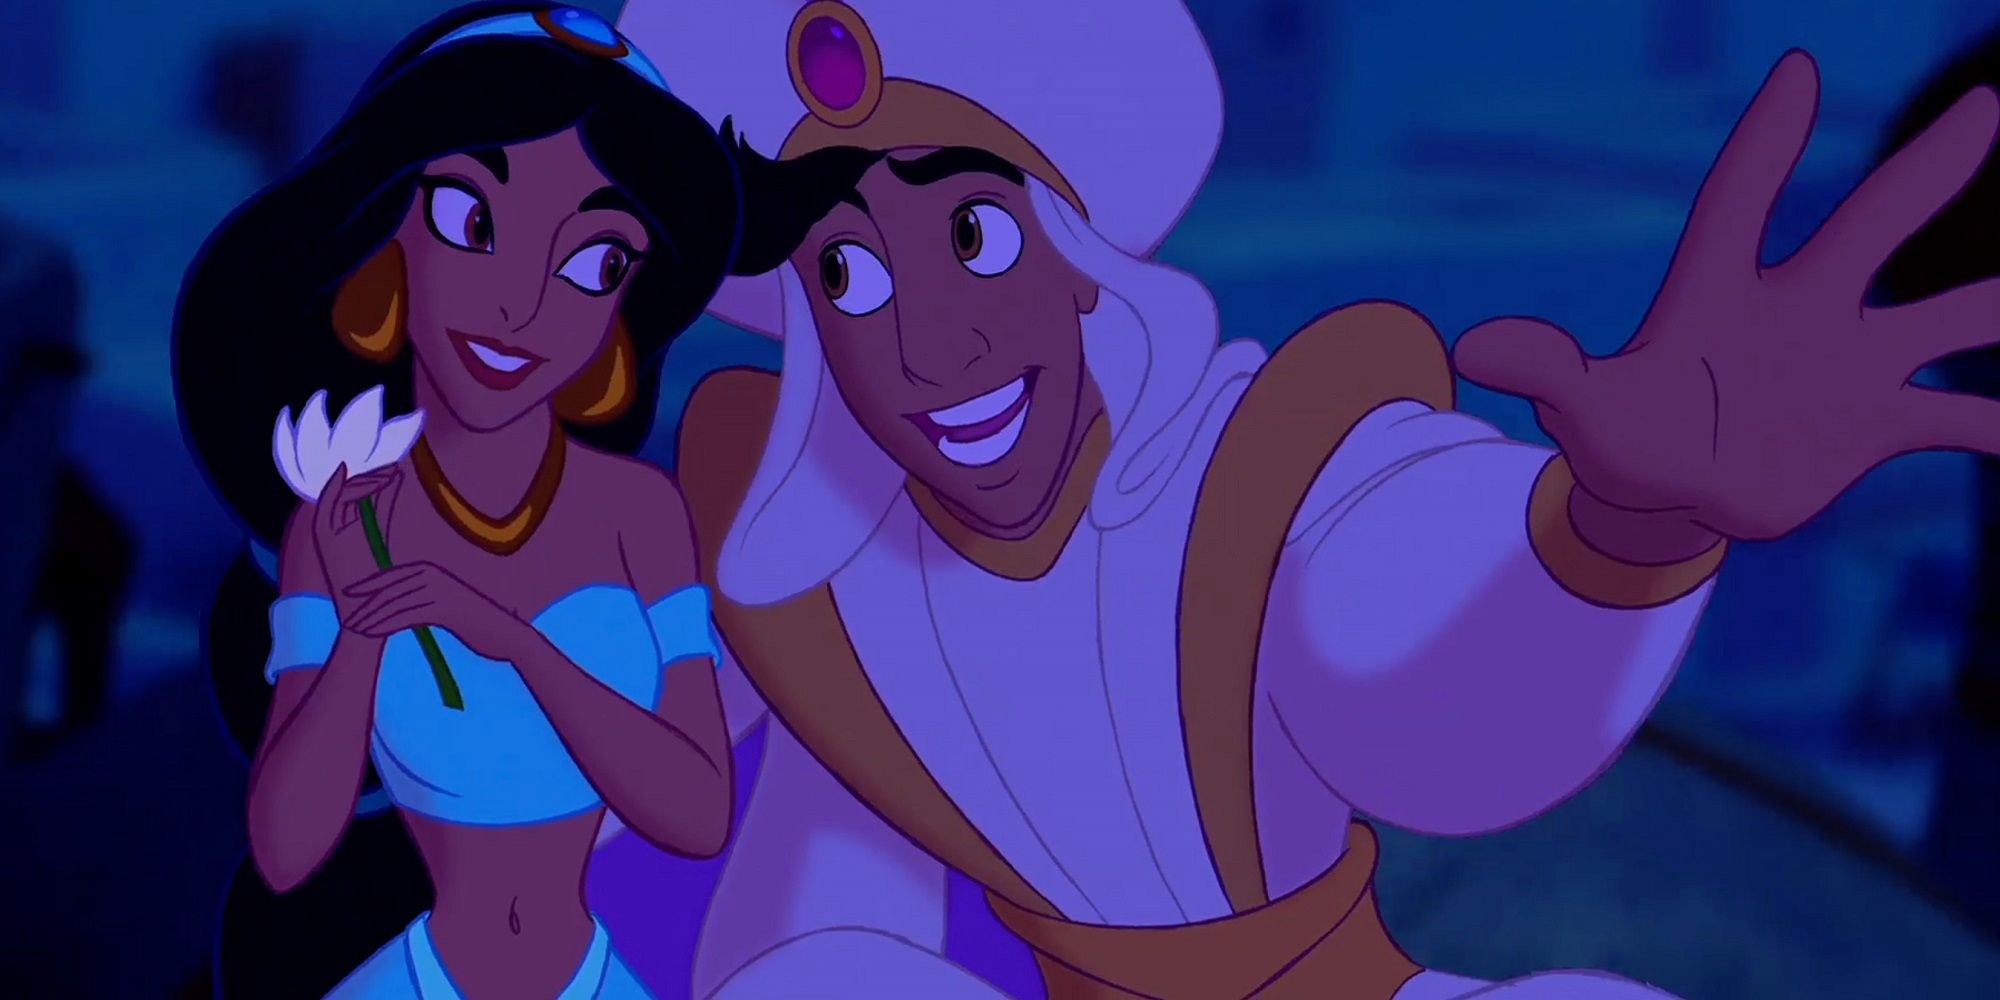 Disney The Most Romantic Things Every Prince Has Done